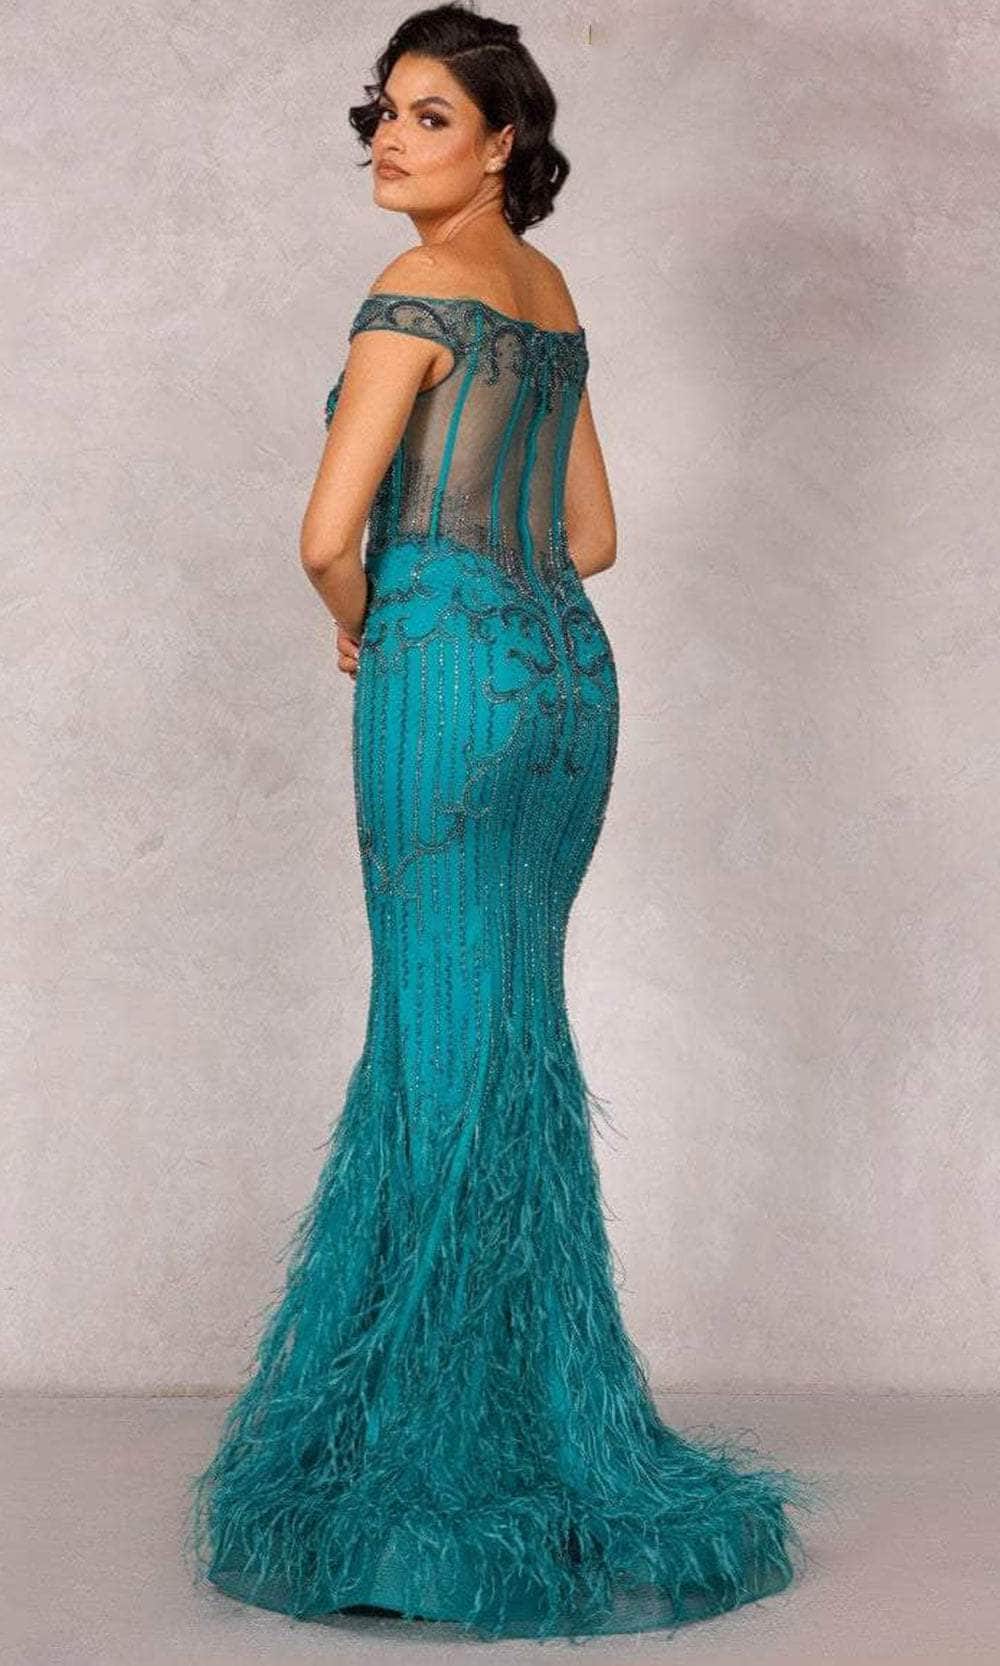 Terani Couture 2214GL0113 - Feather-Ornate Beaded Evening Dress Evening Dresses